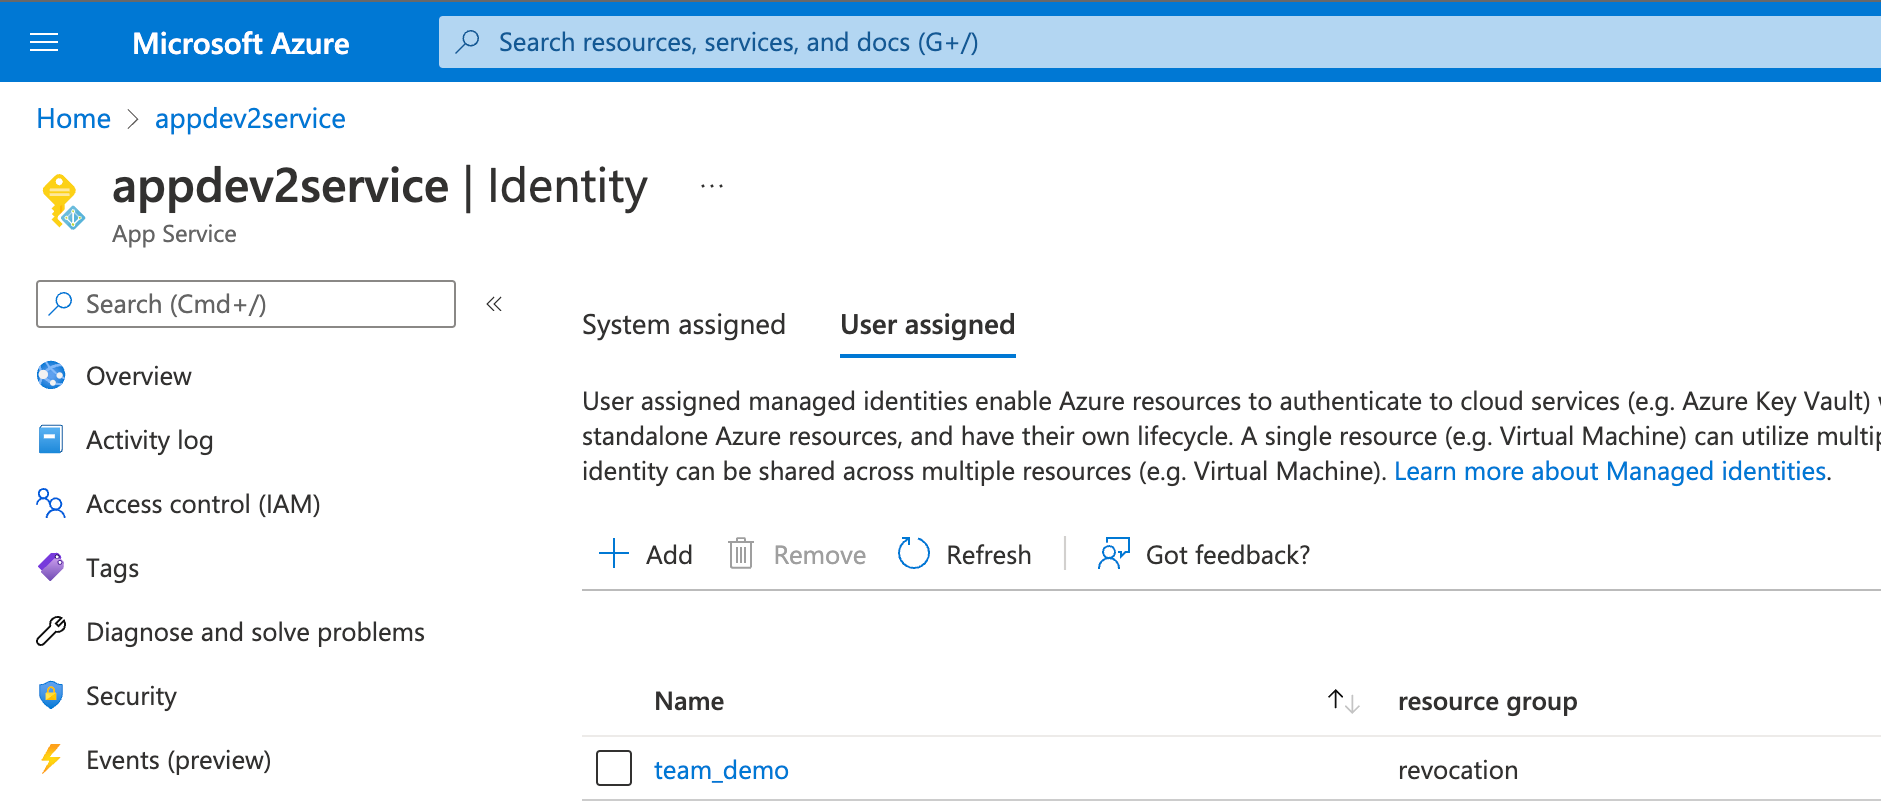 Screenshot showing a user-assigned identity has been associated with the Azure resource in the portal.